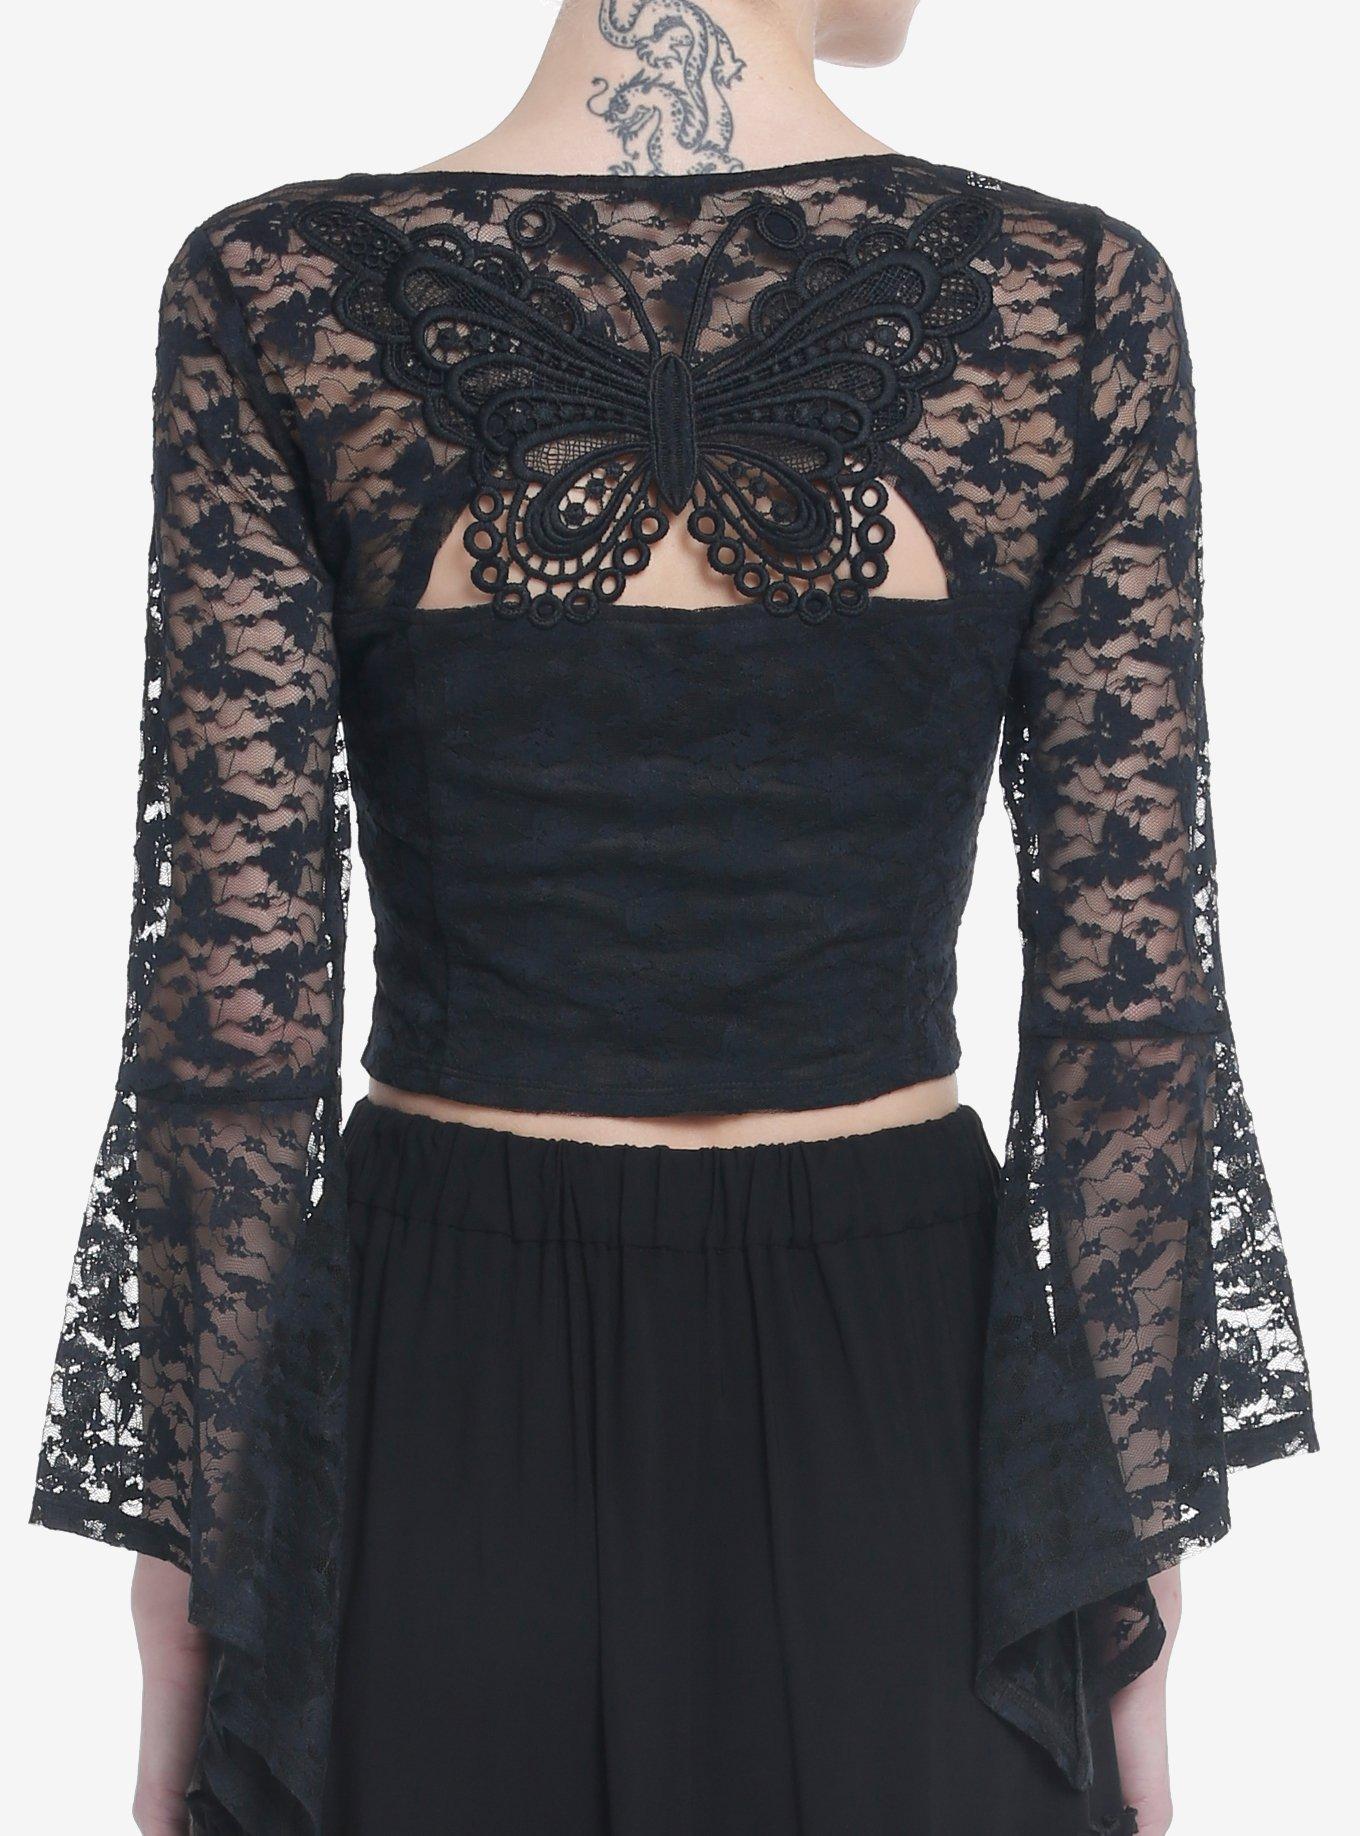 Cosmic Aura Black Butterfly Lace Girls Bell Sleeve Top, BLACK, hi-res